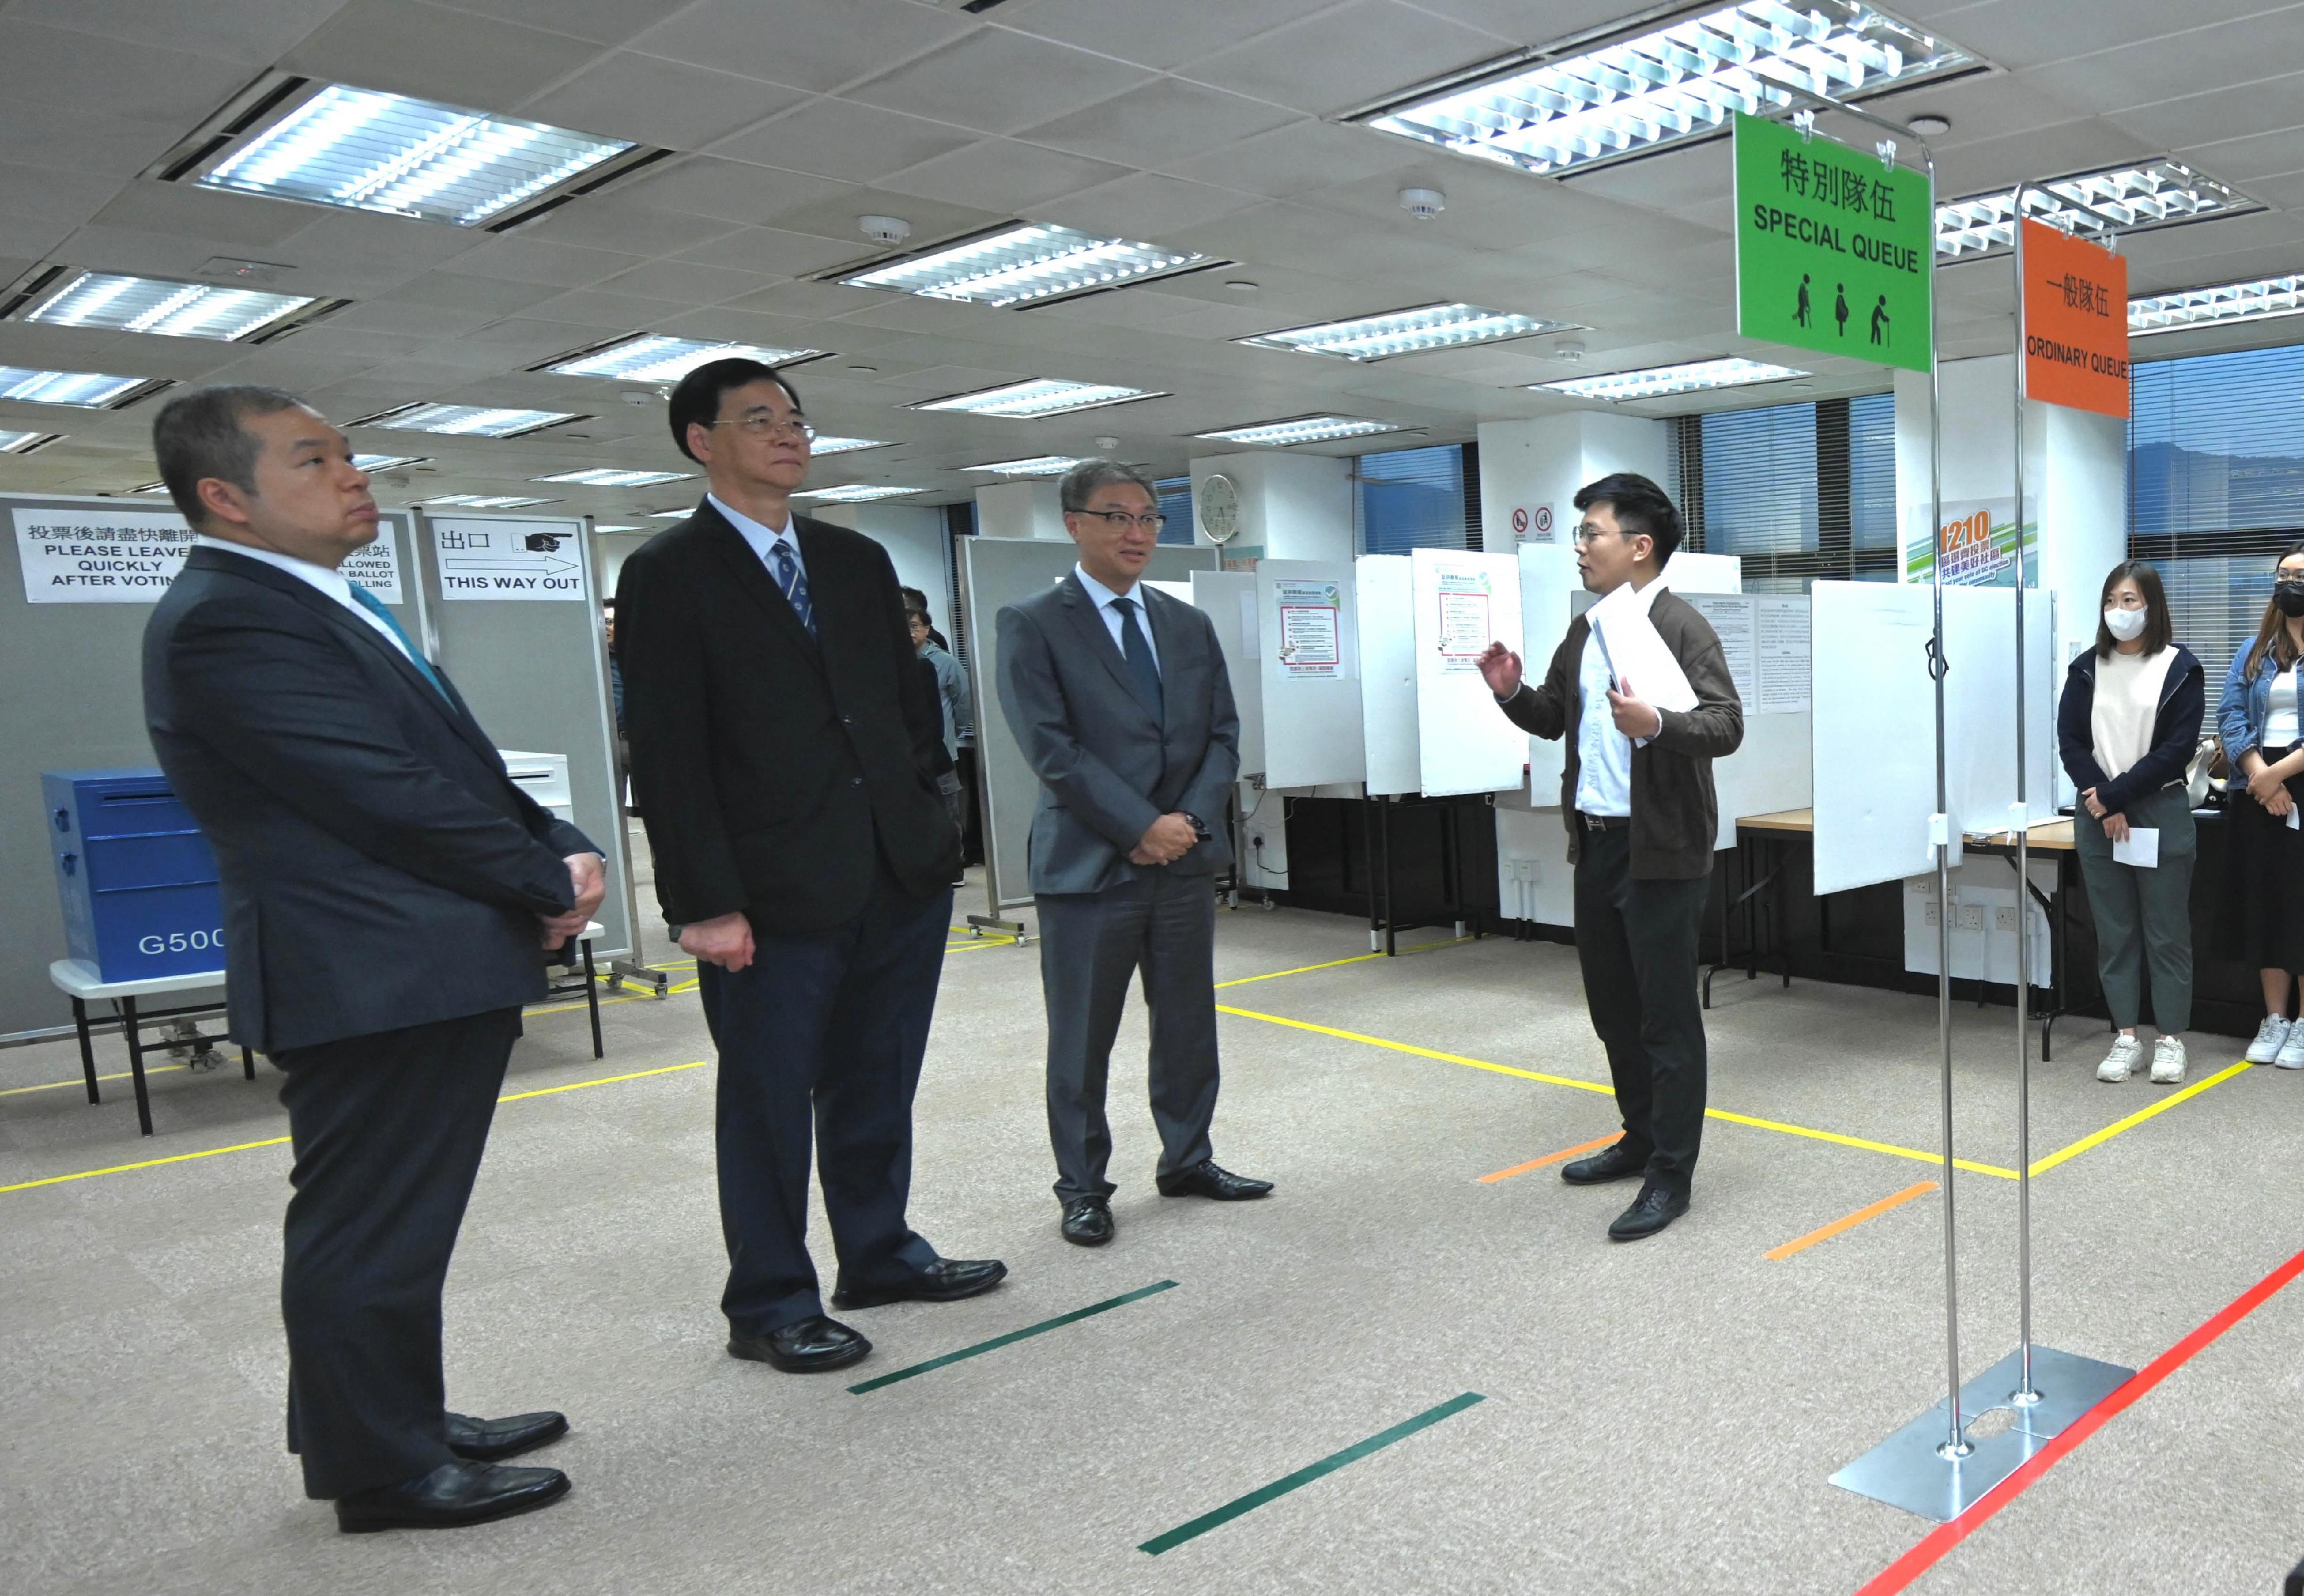 The Chairman of the Electoral Affairs Commission (EAC), Mr Justice David Lok, today (November 23) inspected the demonstration of polling and counting arrangements by the Registration and Electoral Office (REO) for the 2023 District Council Ordinary Election. Photo shows Mr Justice Lok (third left) being briefed by staff of the REO on the operation of the ordinary and special queues in a polling station. Also present were the EAC members Professor Daniel Shek (second left) and Mr Bernard Man, SC (first left).